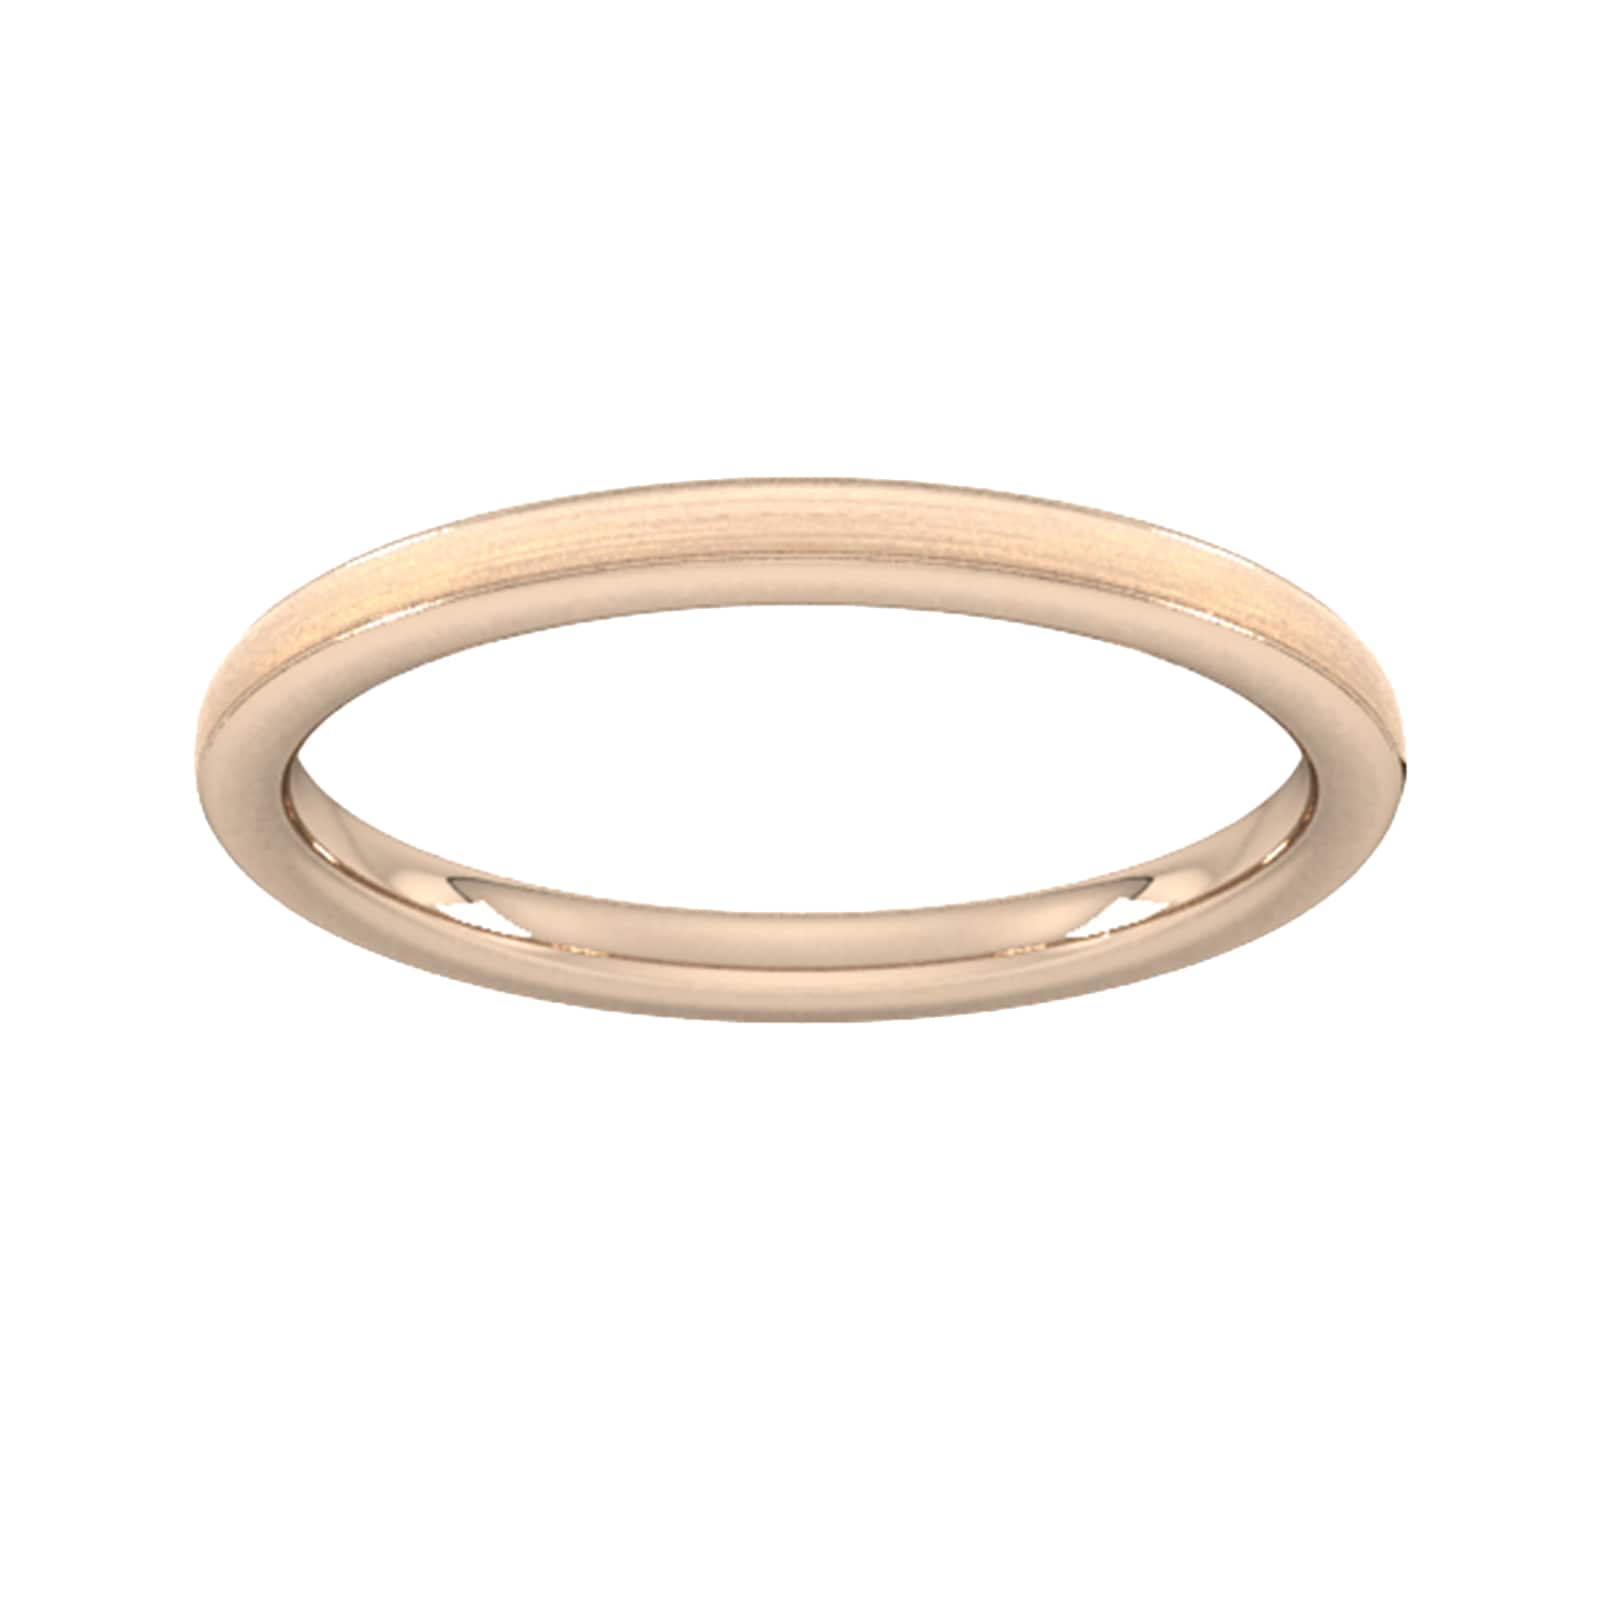 2mm Slight Court Heavy Matt Centre With Grooves Wedding Ring In 9 Carat Rose Gold - Ring Size I